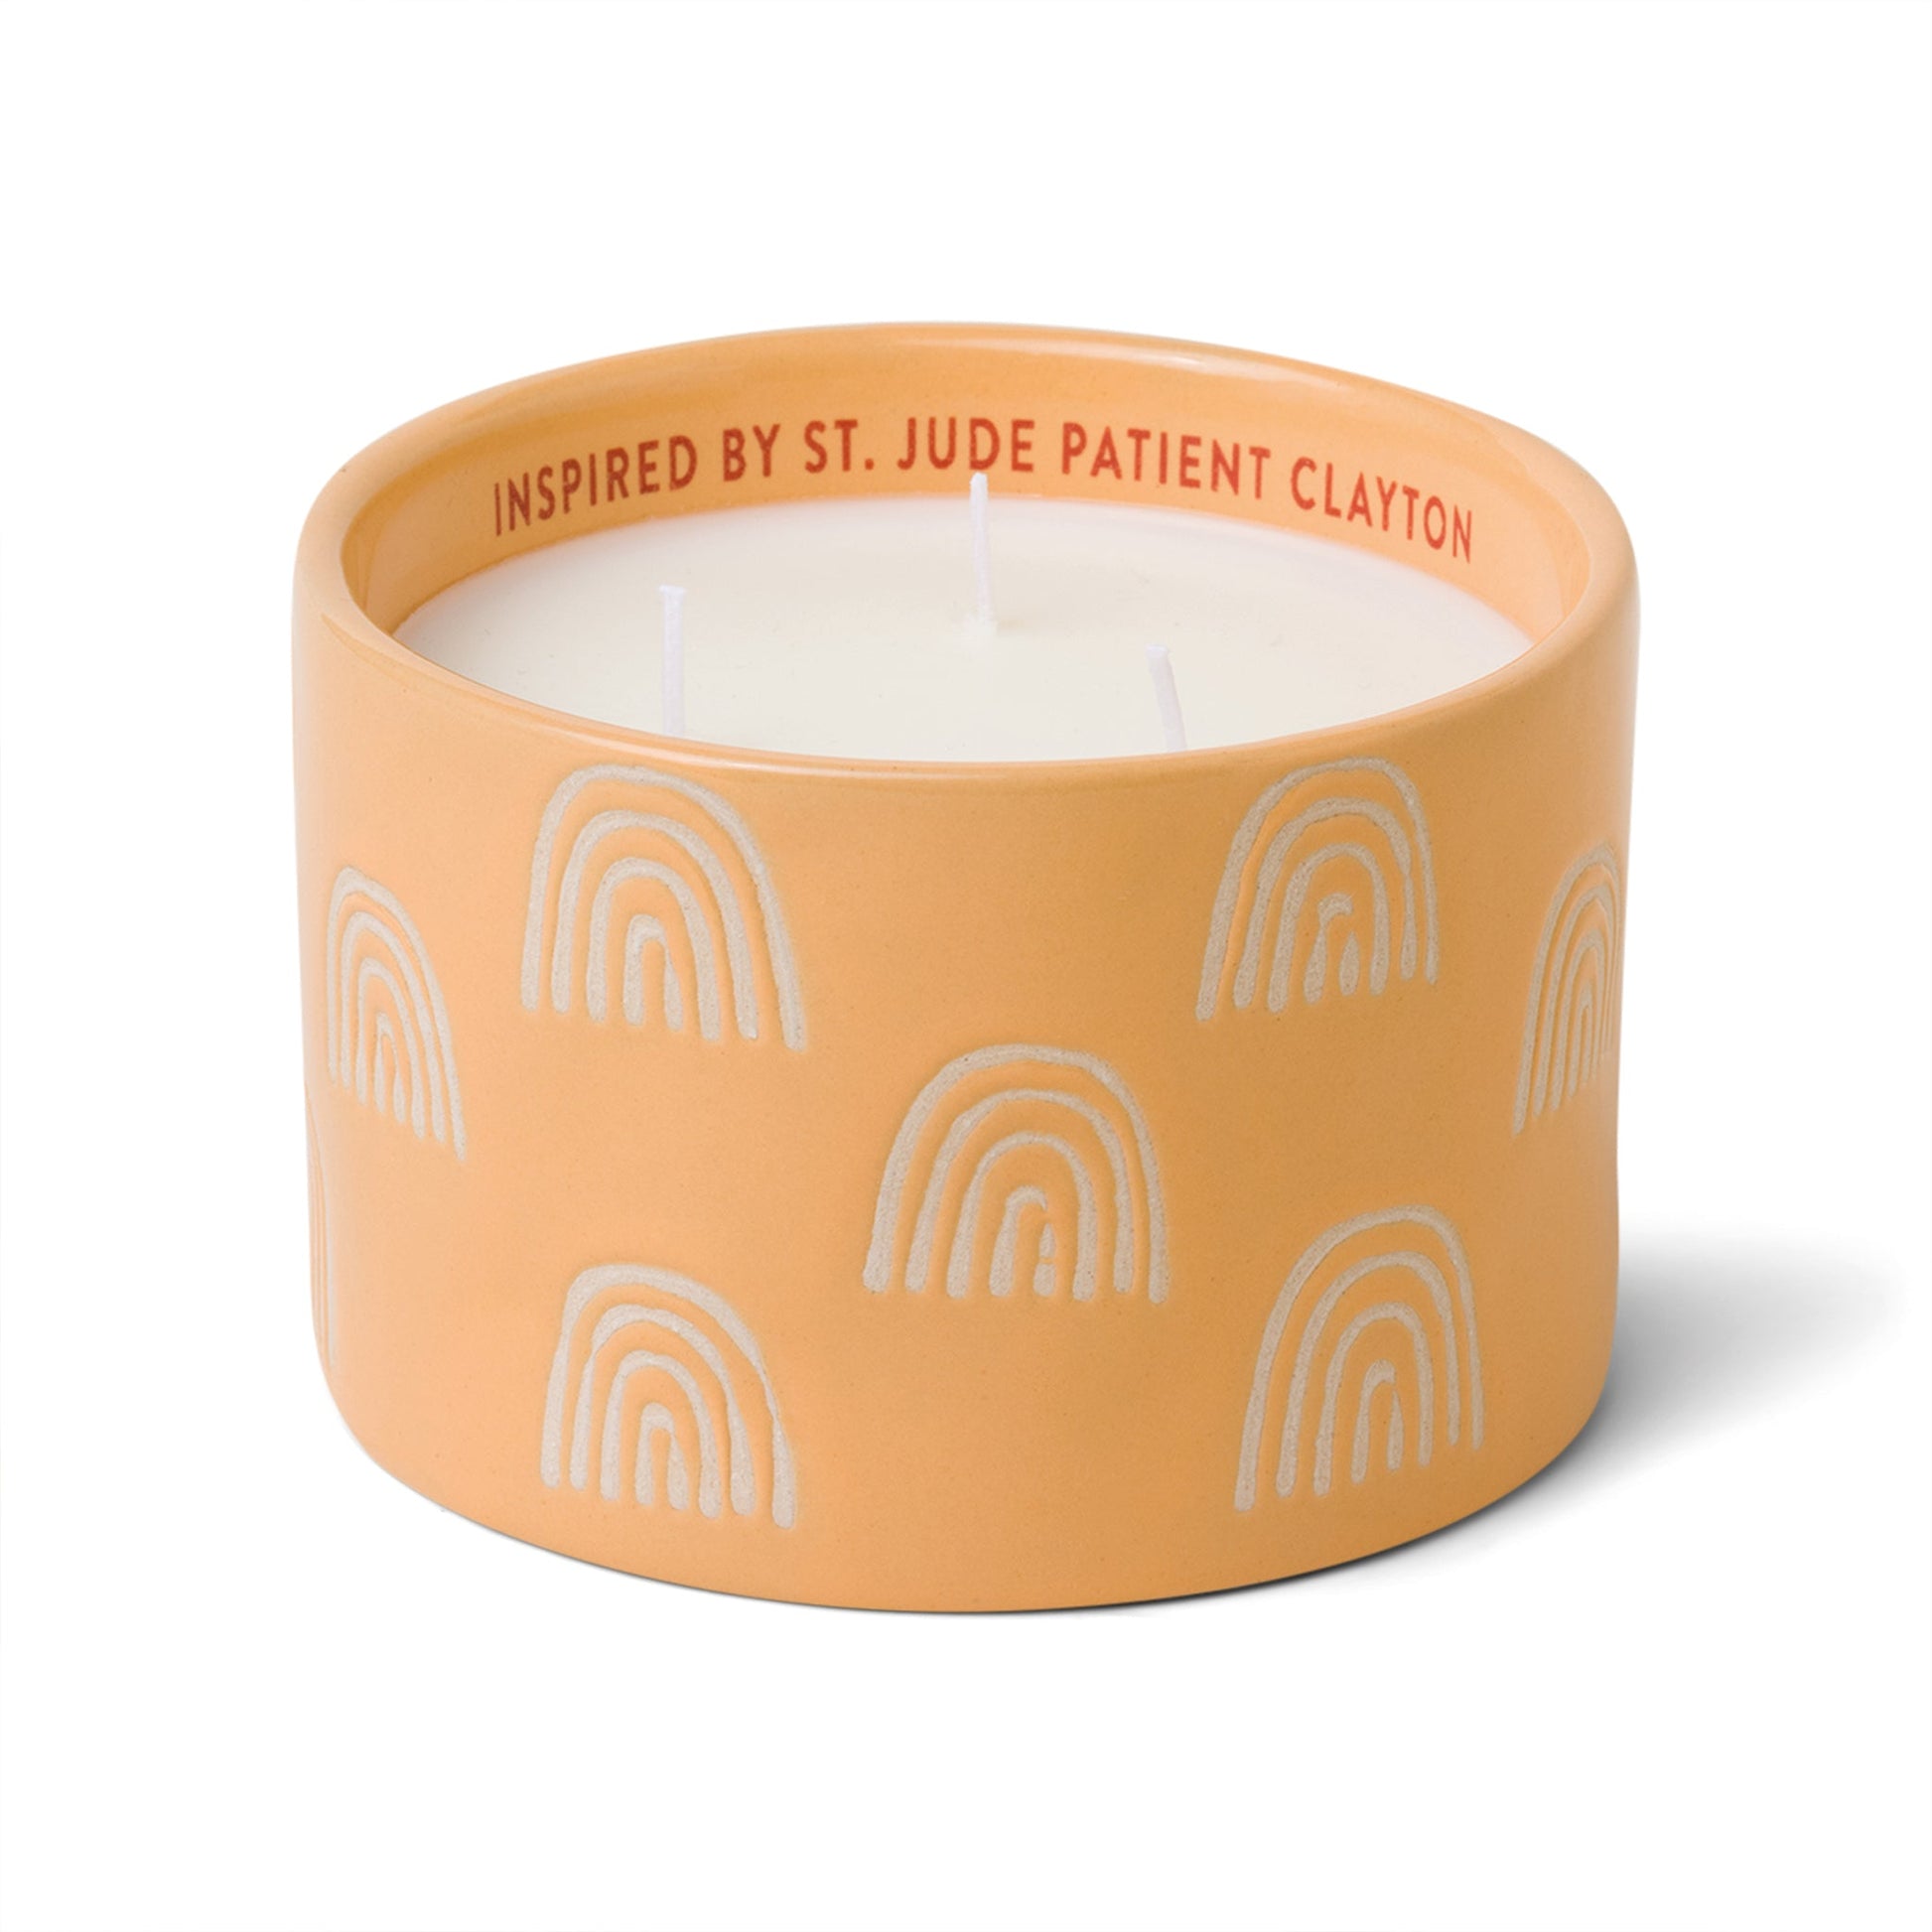 Yellow ceramic candle with rainbows and white soy wax center with three wicks. Debossed name on back side of the label with text "Inspired by St. Jude patient Clayton". Scented candle on white background